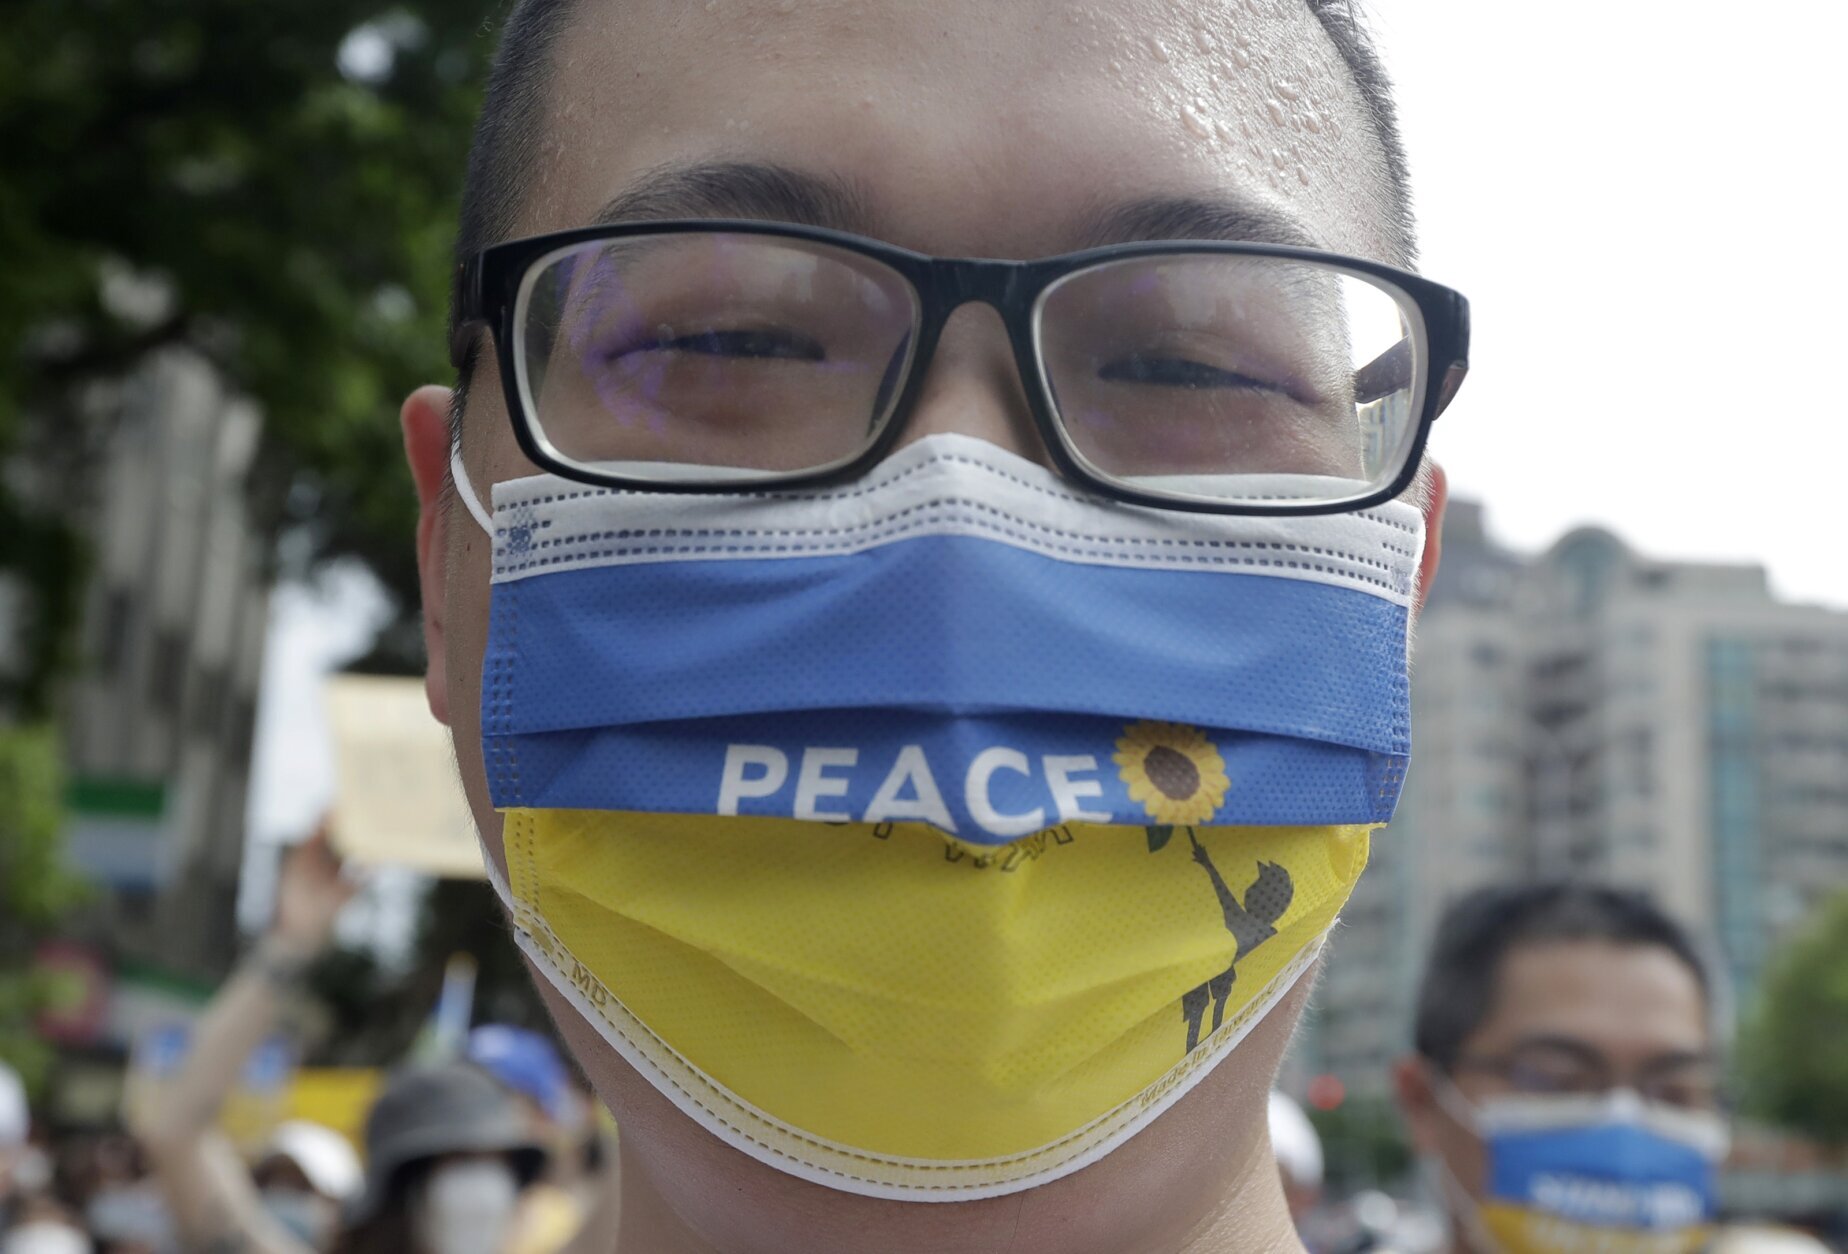 A Taiwanese man wears a Ukraine national flag-patterned mask in protest against the invasion of Russia during a march in Taipei, Taiwan, Sunday, March 13, 2022. (AP Photo/Chiang Ying-ying)